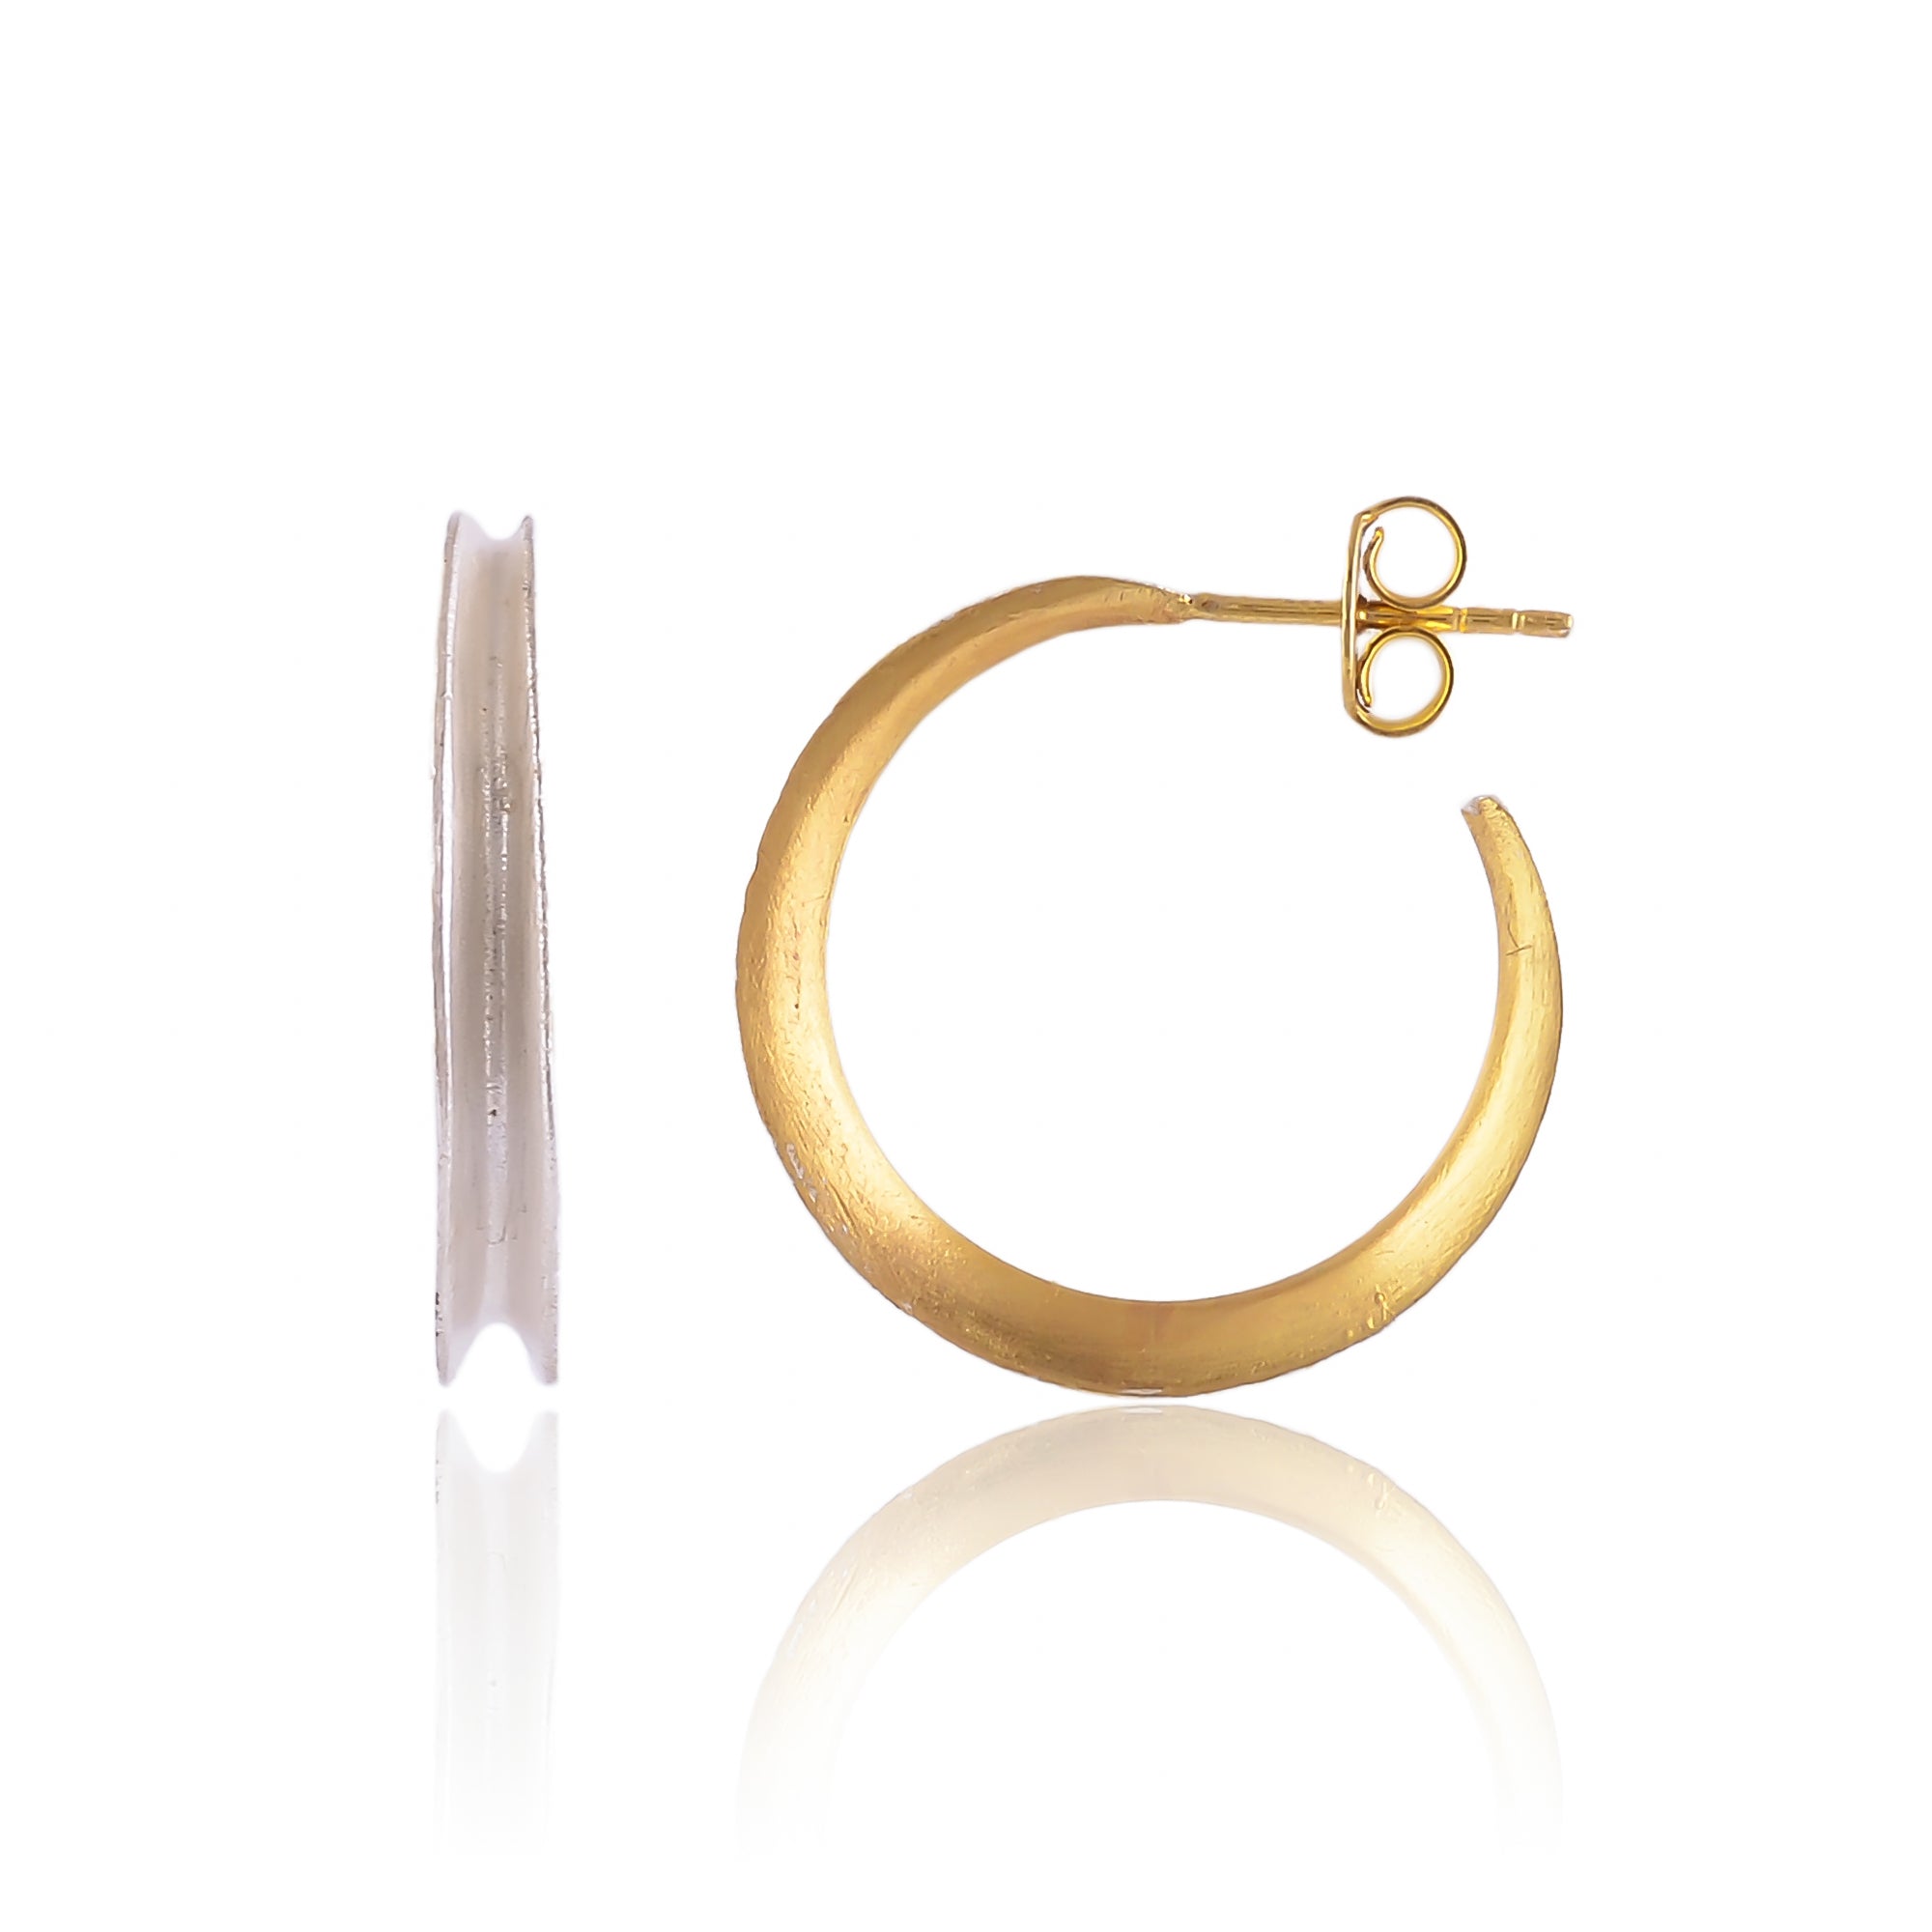 Buy Hand Crafted Silver Gold White Plated Hoop